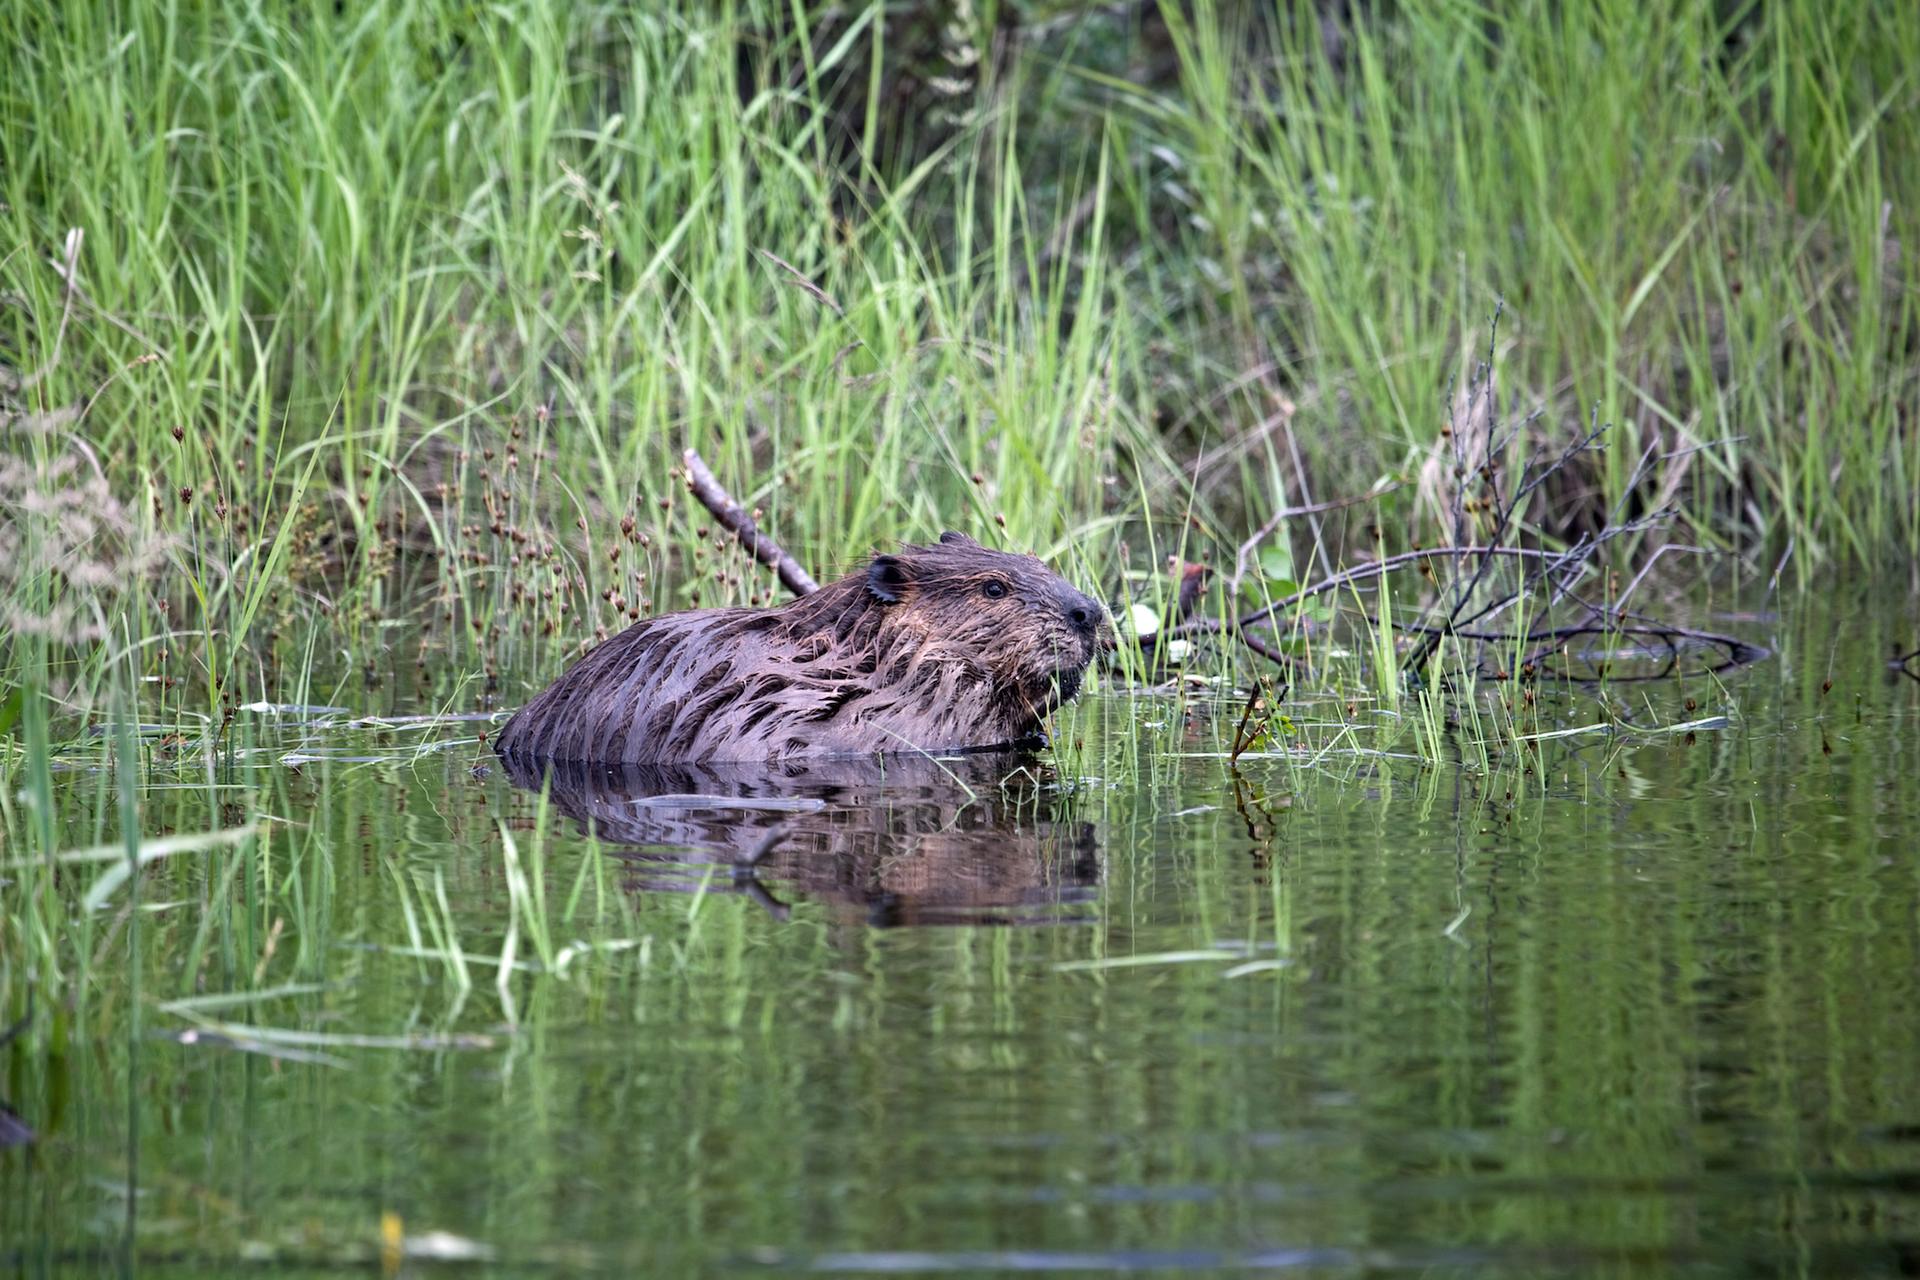 The largest beaver dam in the world is in Wood Buffalo National Park